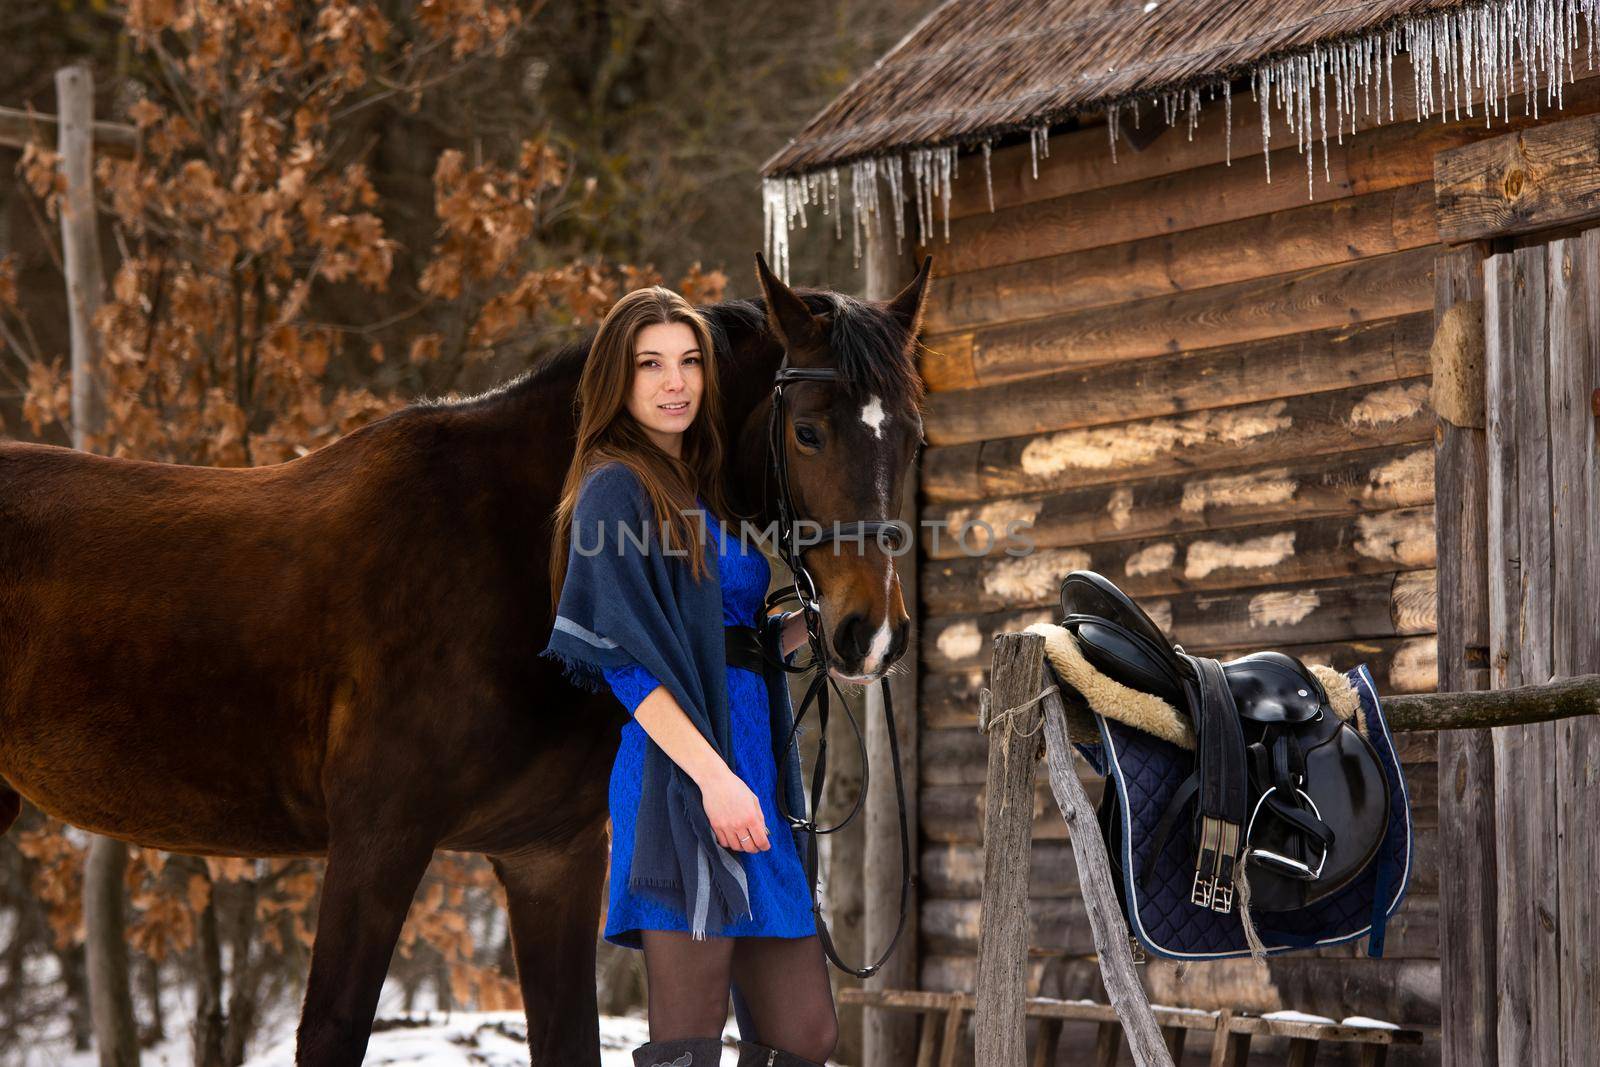 A beautiful girl in a short blue dress stands with a horse against the background of old ruins